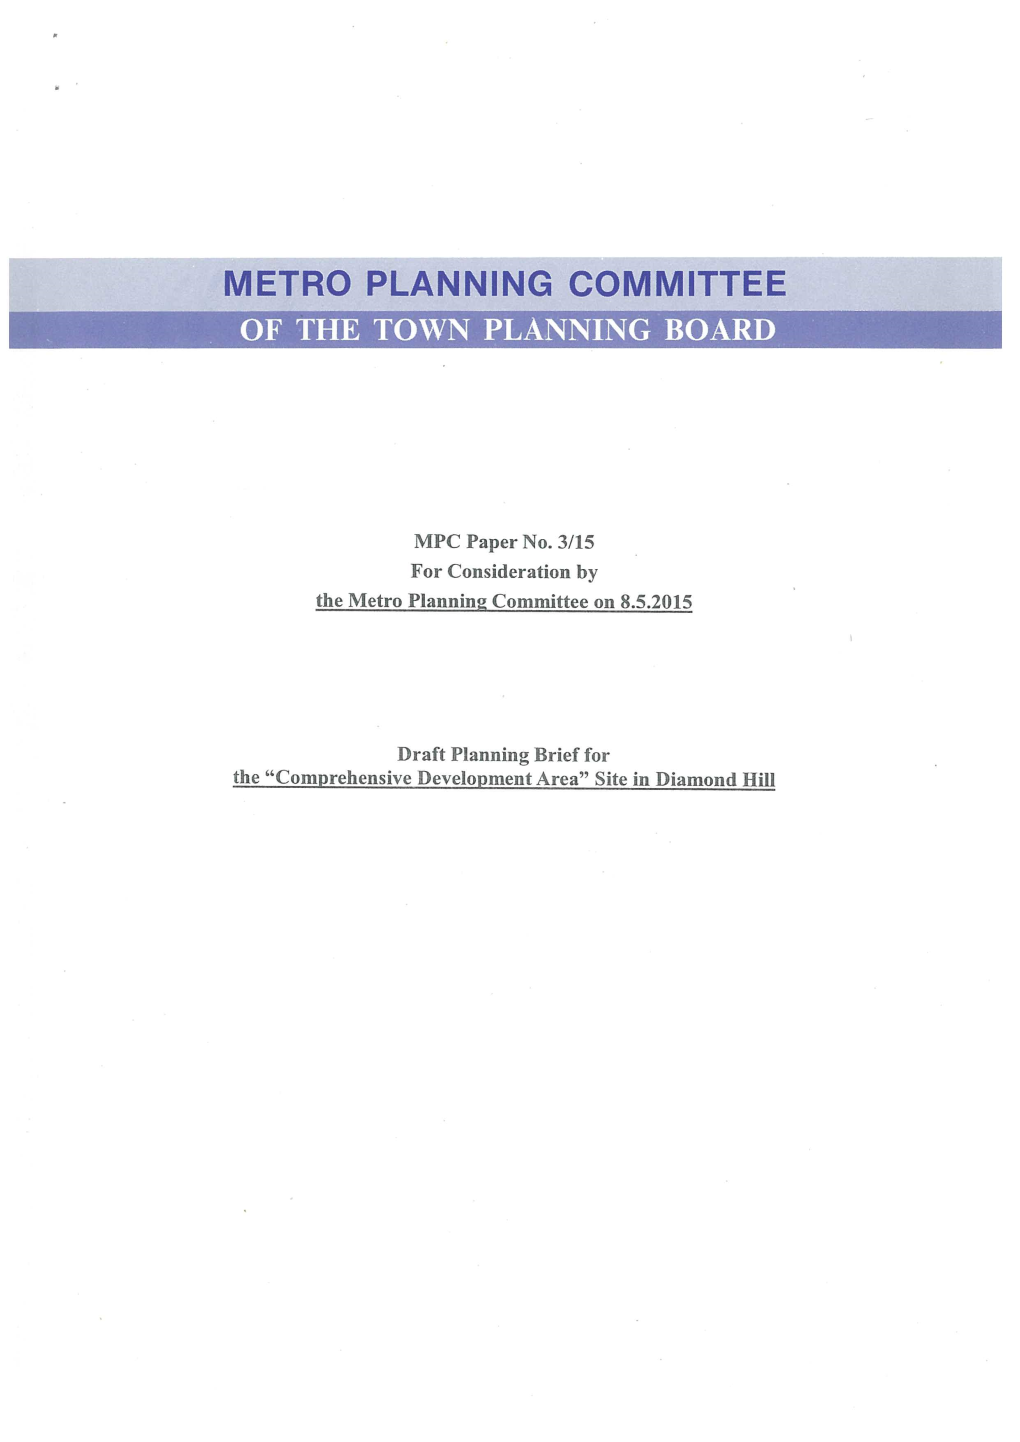 MPC Paper No. 3/15 for Consideration by the Metro Planning Committee on 8.5.2015